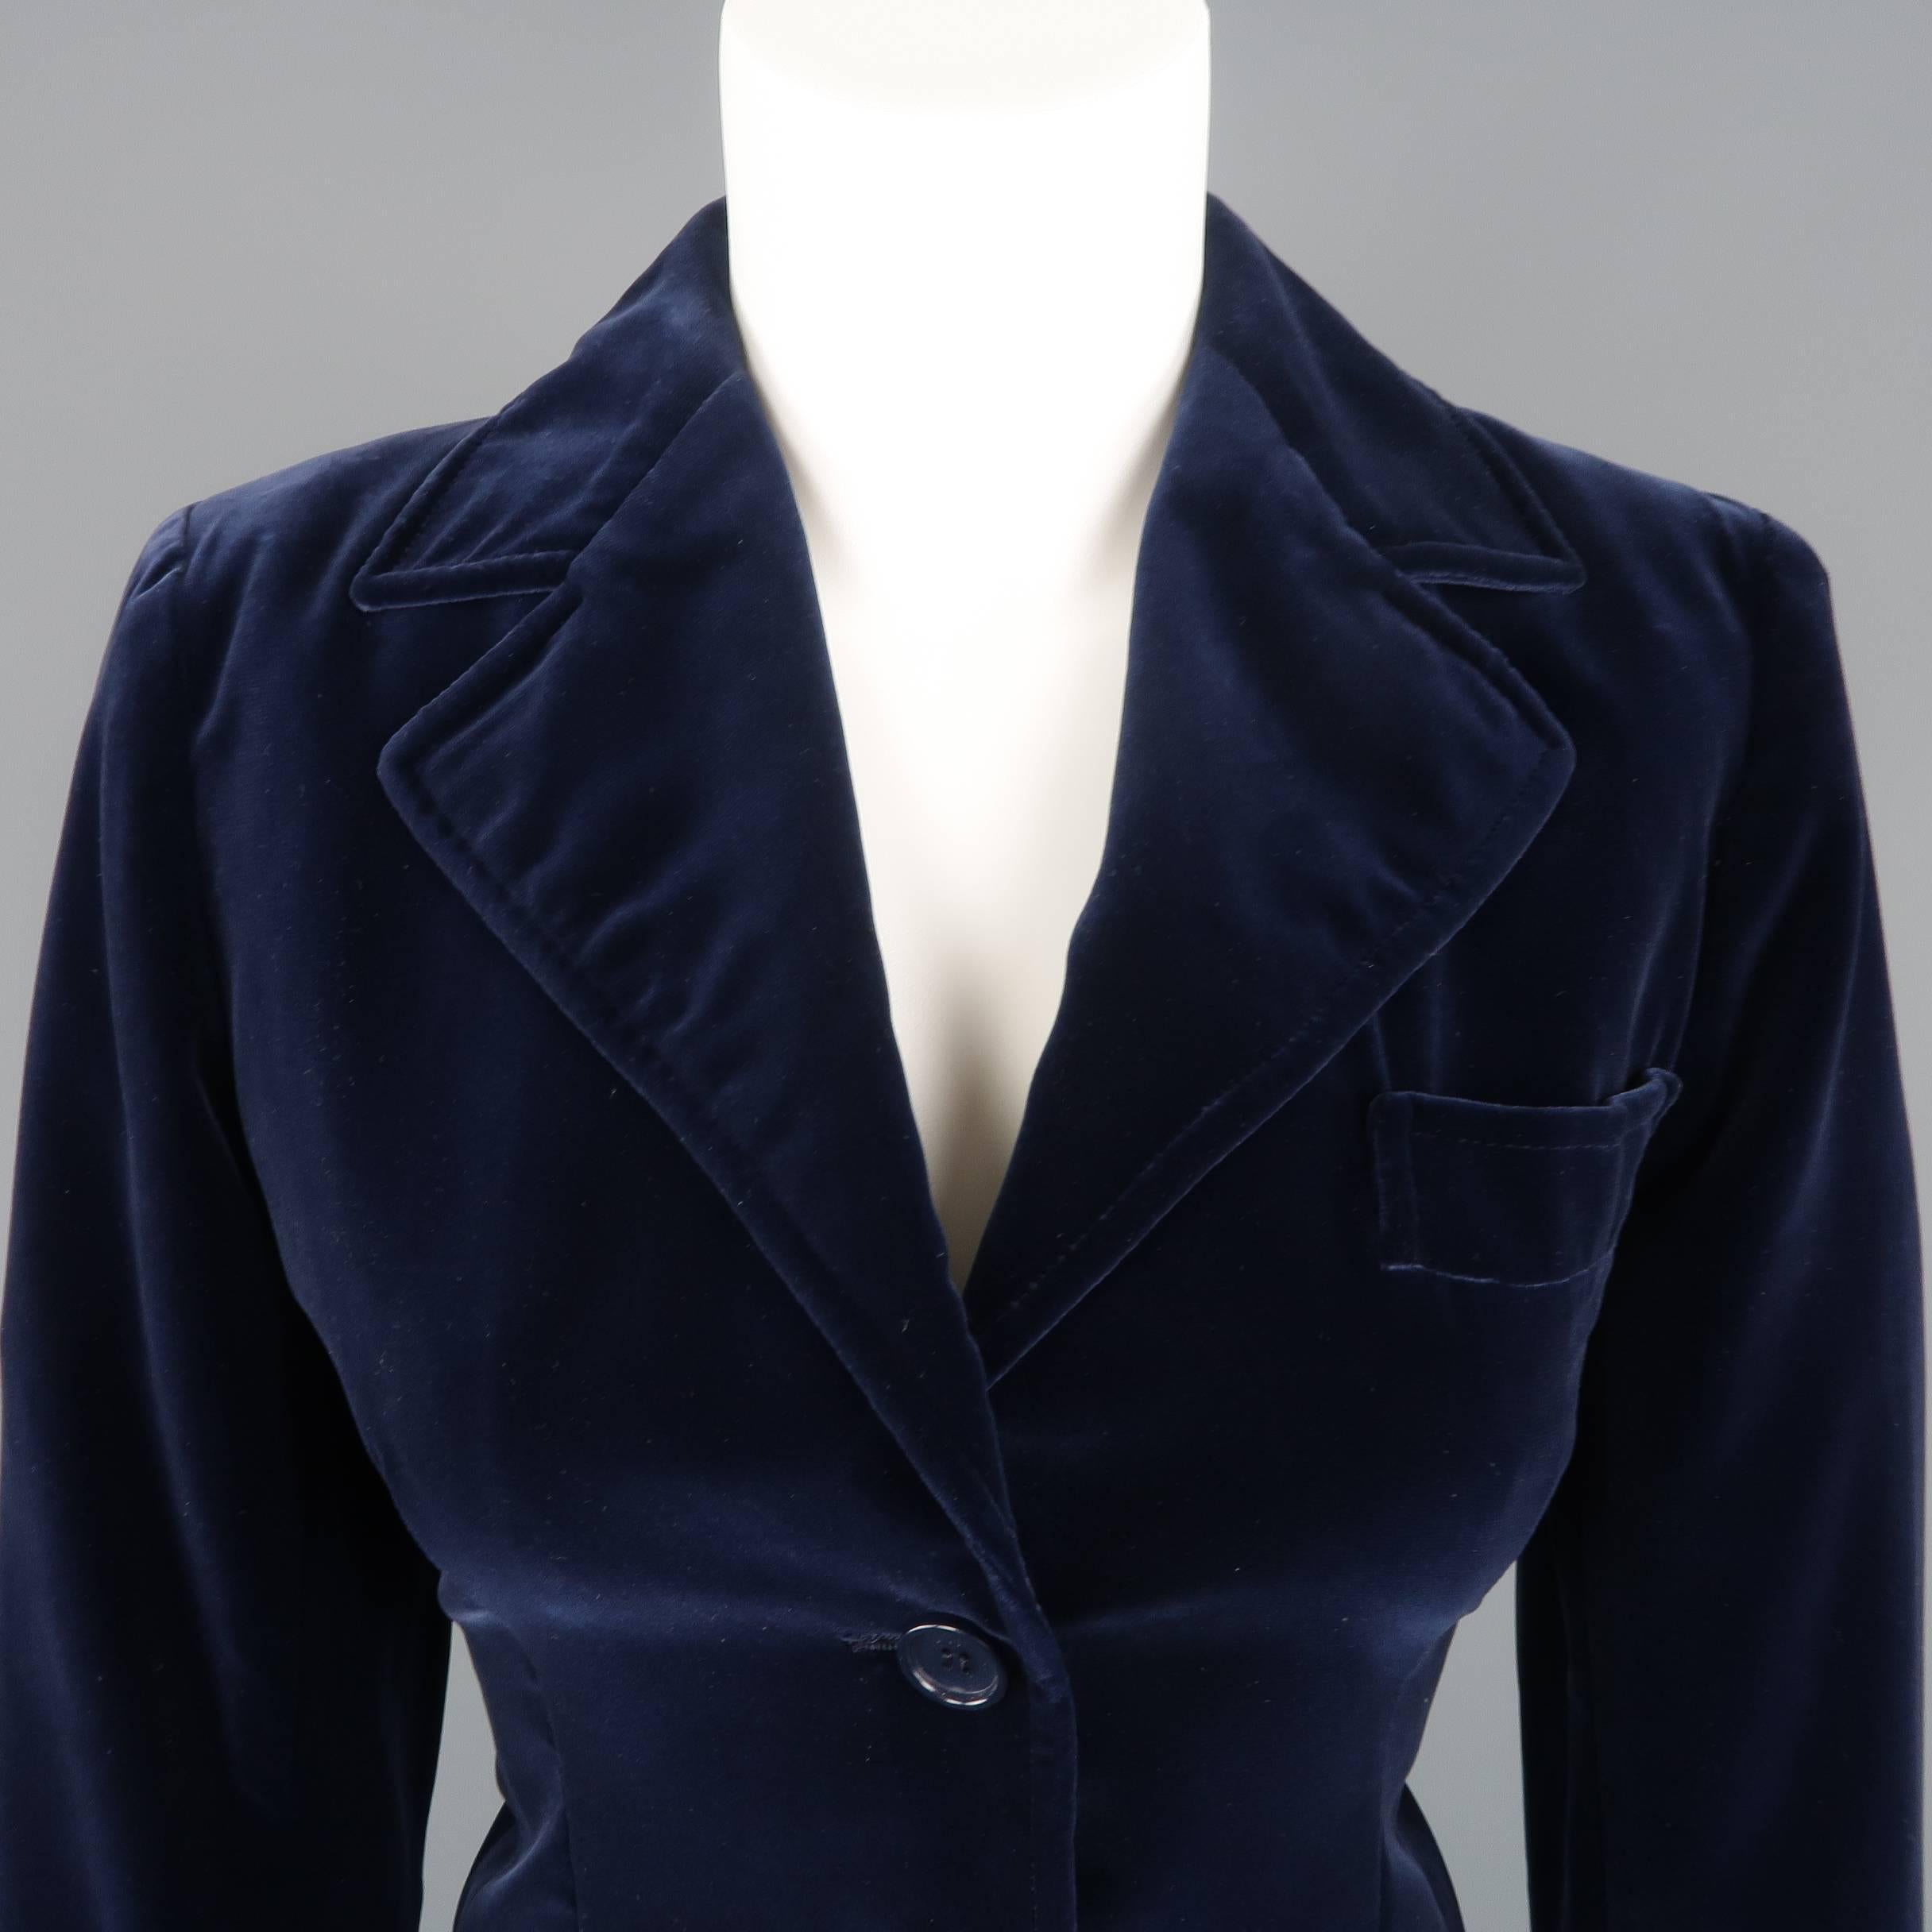 Vintage Yves Saint Laurent Rive Gauche sport coat comes in cotton blend velvet with a three button front, pointed lapel and patch pockets. Minor wear. Made in France.
 
Good Pre-Owned Condition.
Marked: FR 38
 
Measurements:
 
Shoulder: 15 in.
Bust: